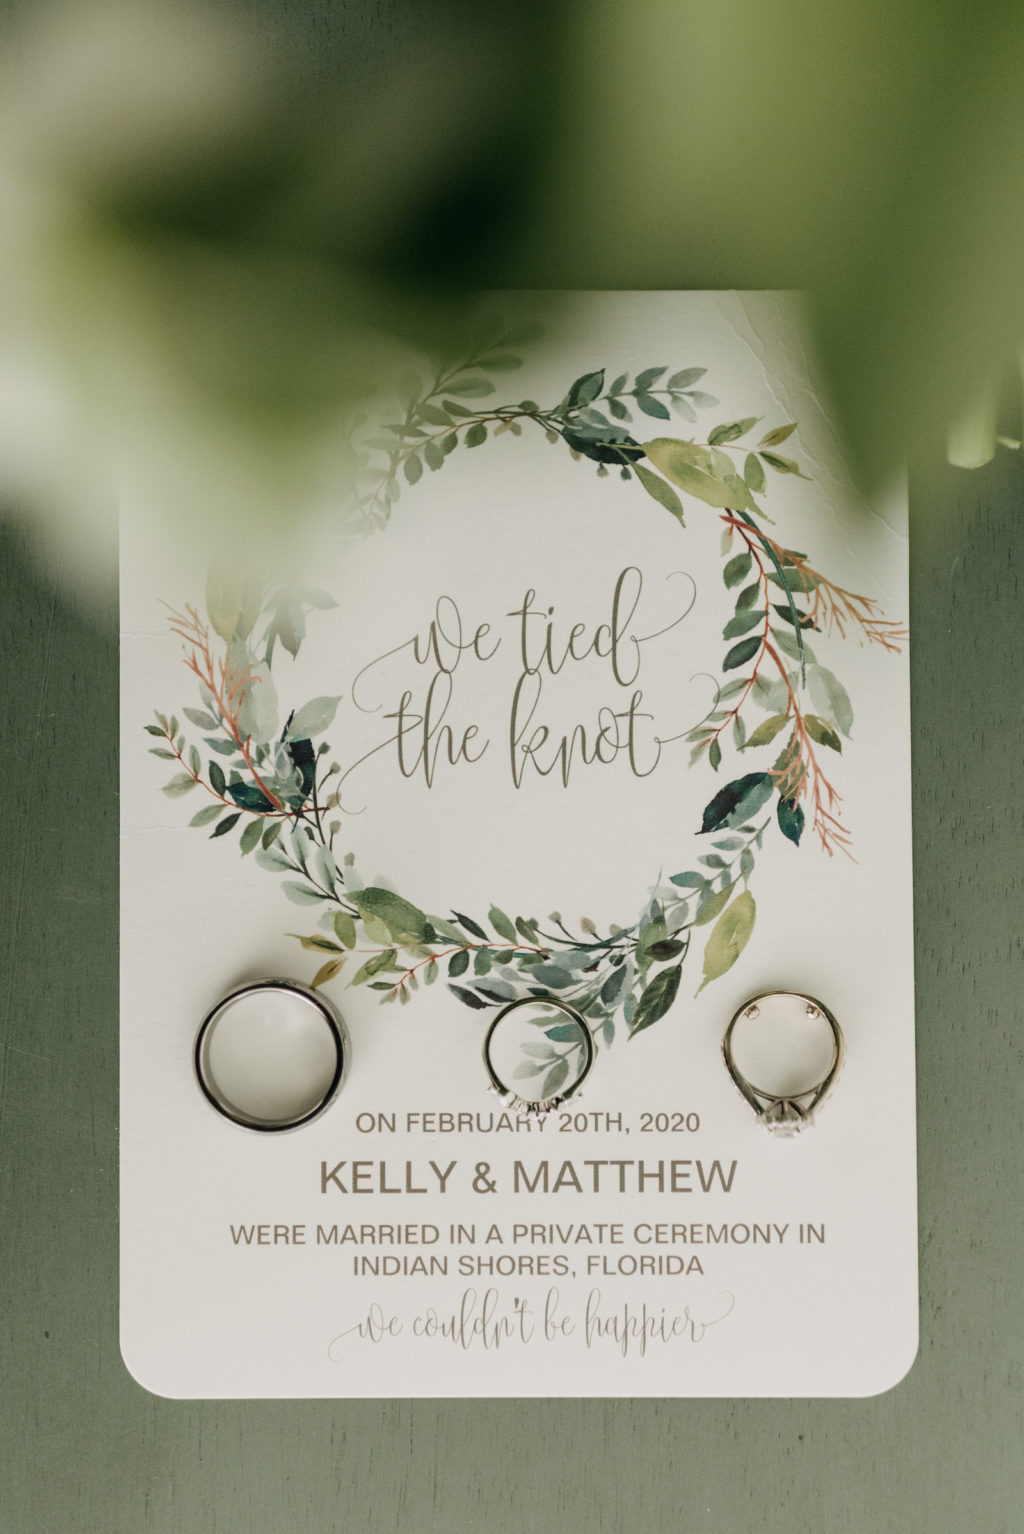 Tampa St Pete Florida COVID Destination Elopement Announcement Stationery with Greenery Motif | Wedding Rings Shot | Indian Shores Wedding Invitation